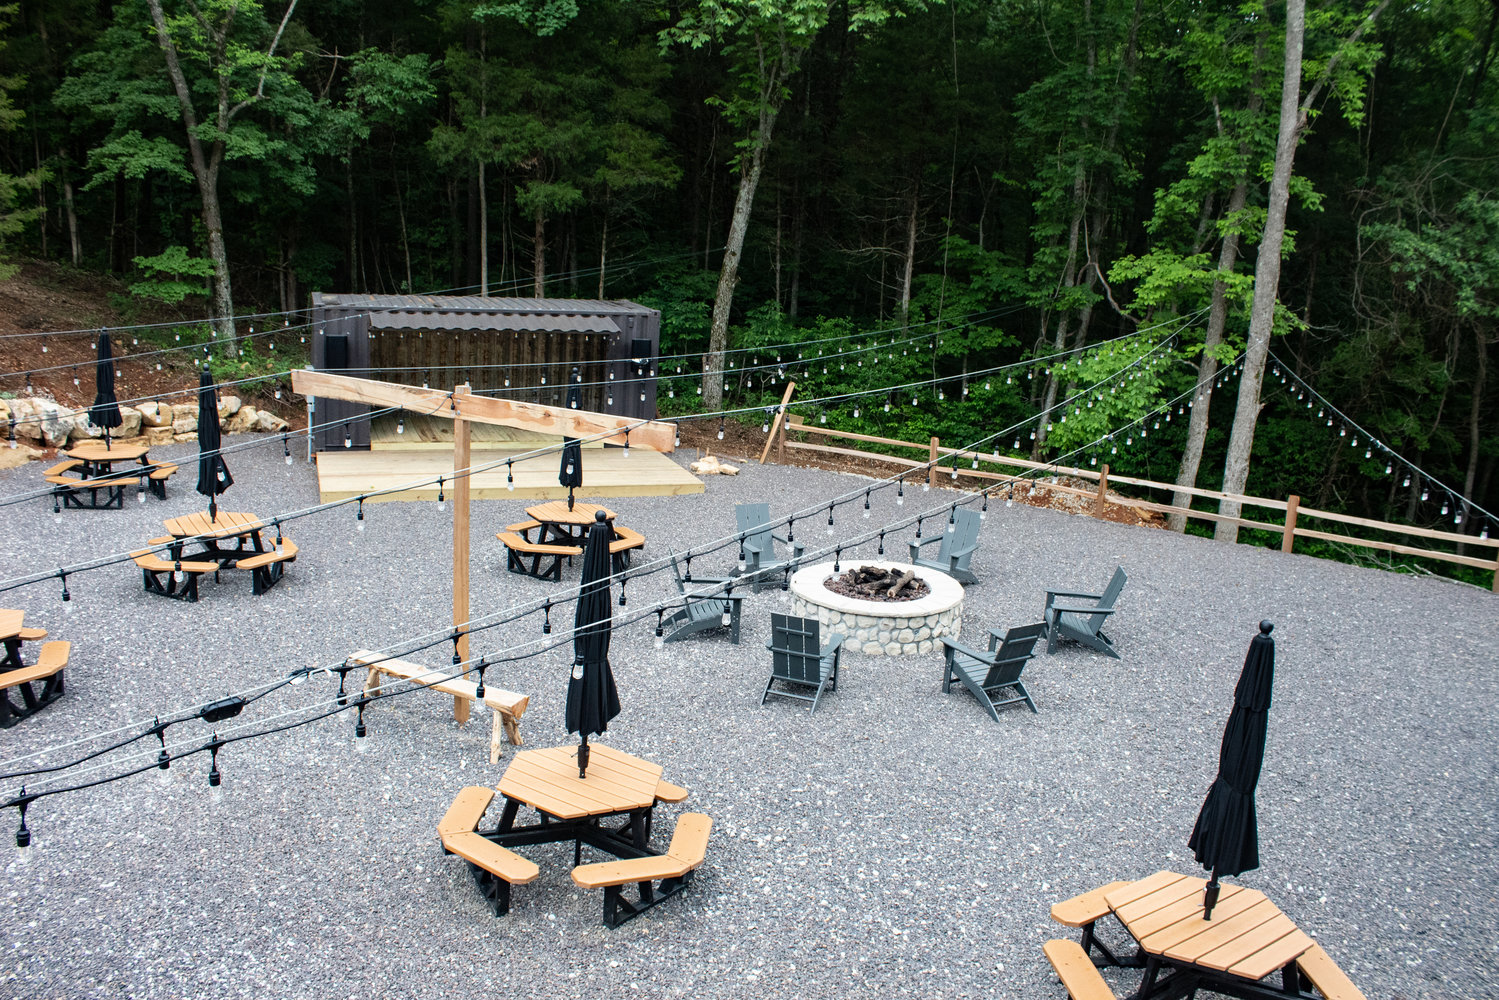 Howler Bike Park's basecamp includes seating for roughly 150 people, a stage for musical performances and a food trailer